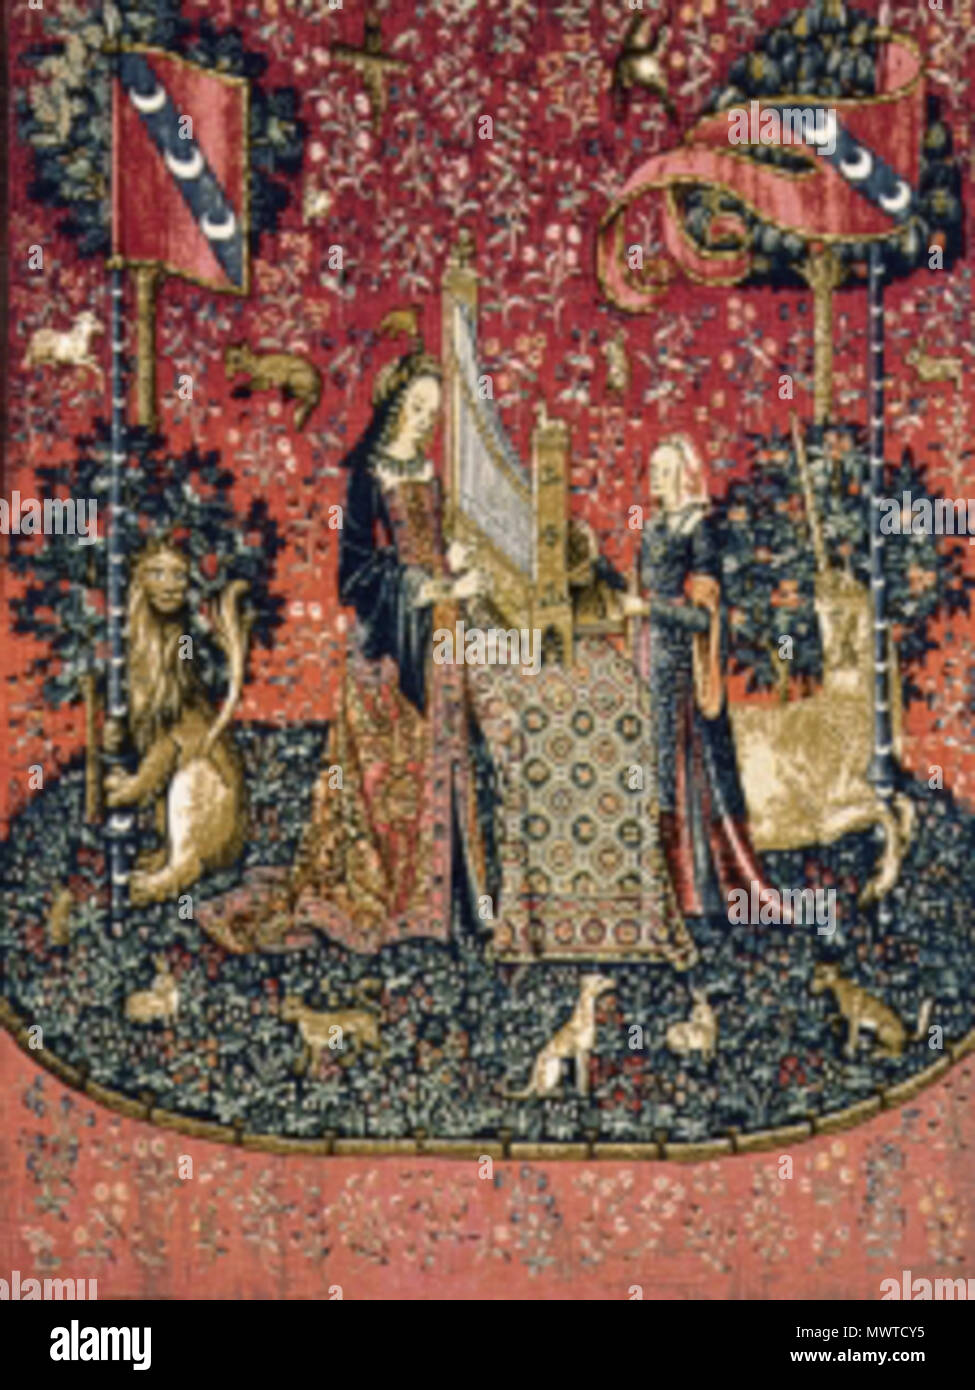 English: The Lady and the Unicorn, Hearing, 1484 – 1500, Paris (cartons),  Flanders (weaving), tapestry (wool and silk), 370 × 290 cm, National Museum  of the Middle Ages, Paris. Acquired 1882 (